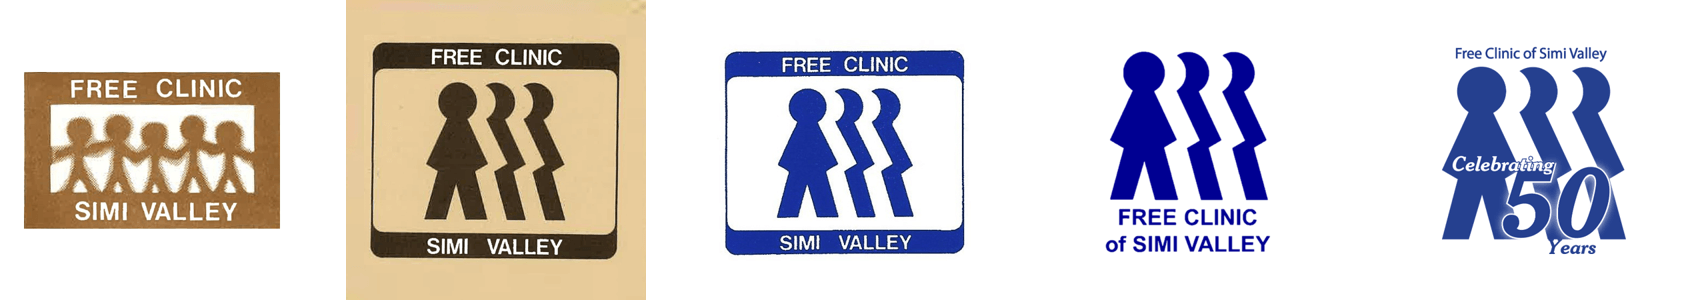 Historical logos of the Free Clinic of Simi Valley